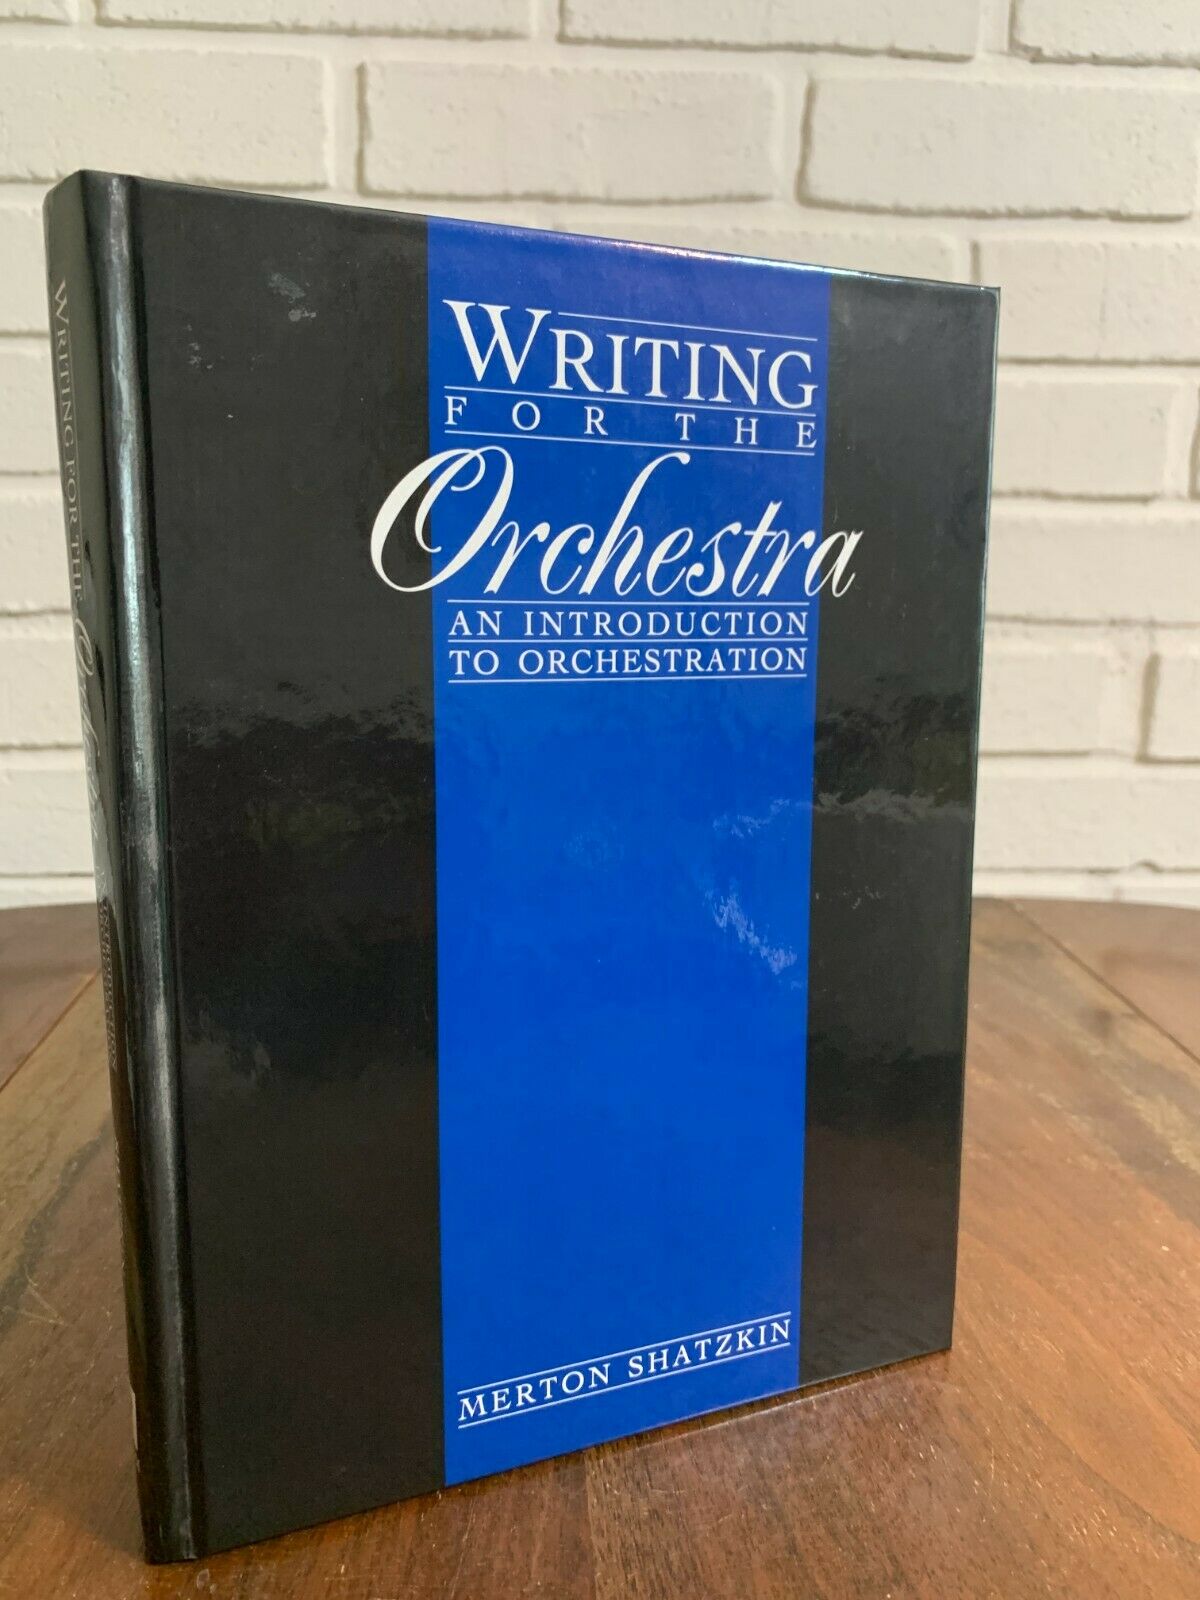 Writing for the Orchestra Introduction to Orchestration, Merton Shatzkin [1993]